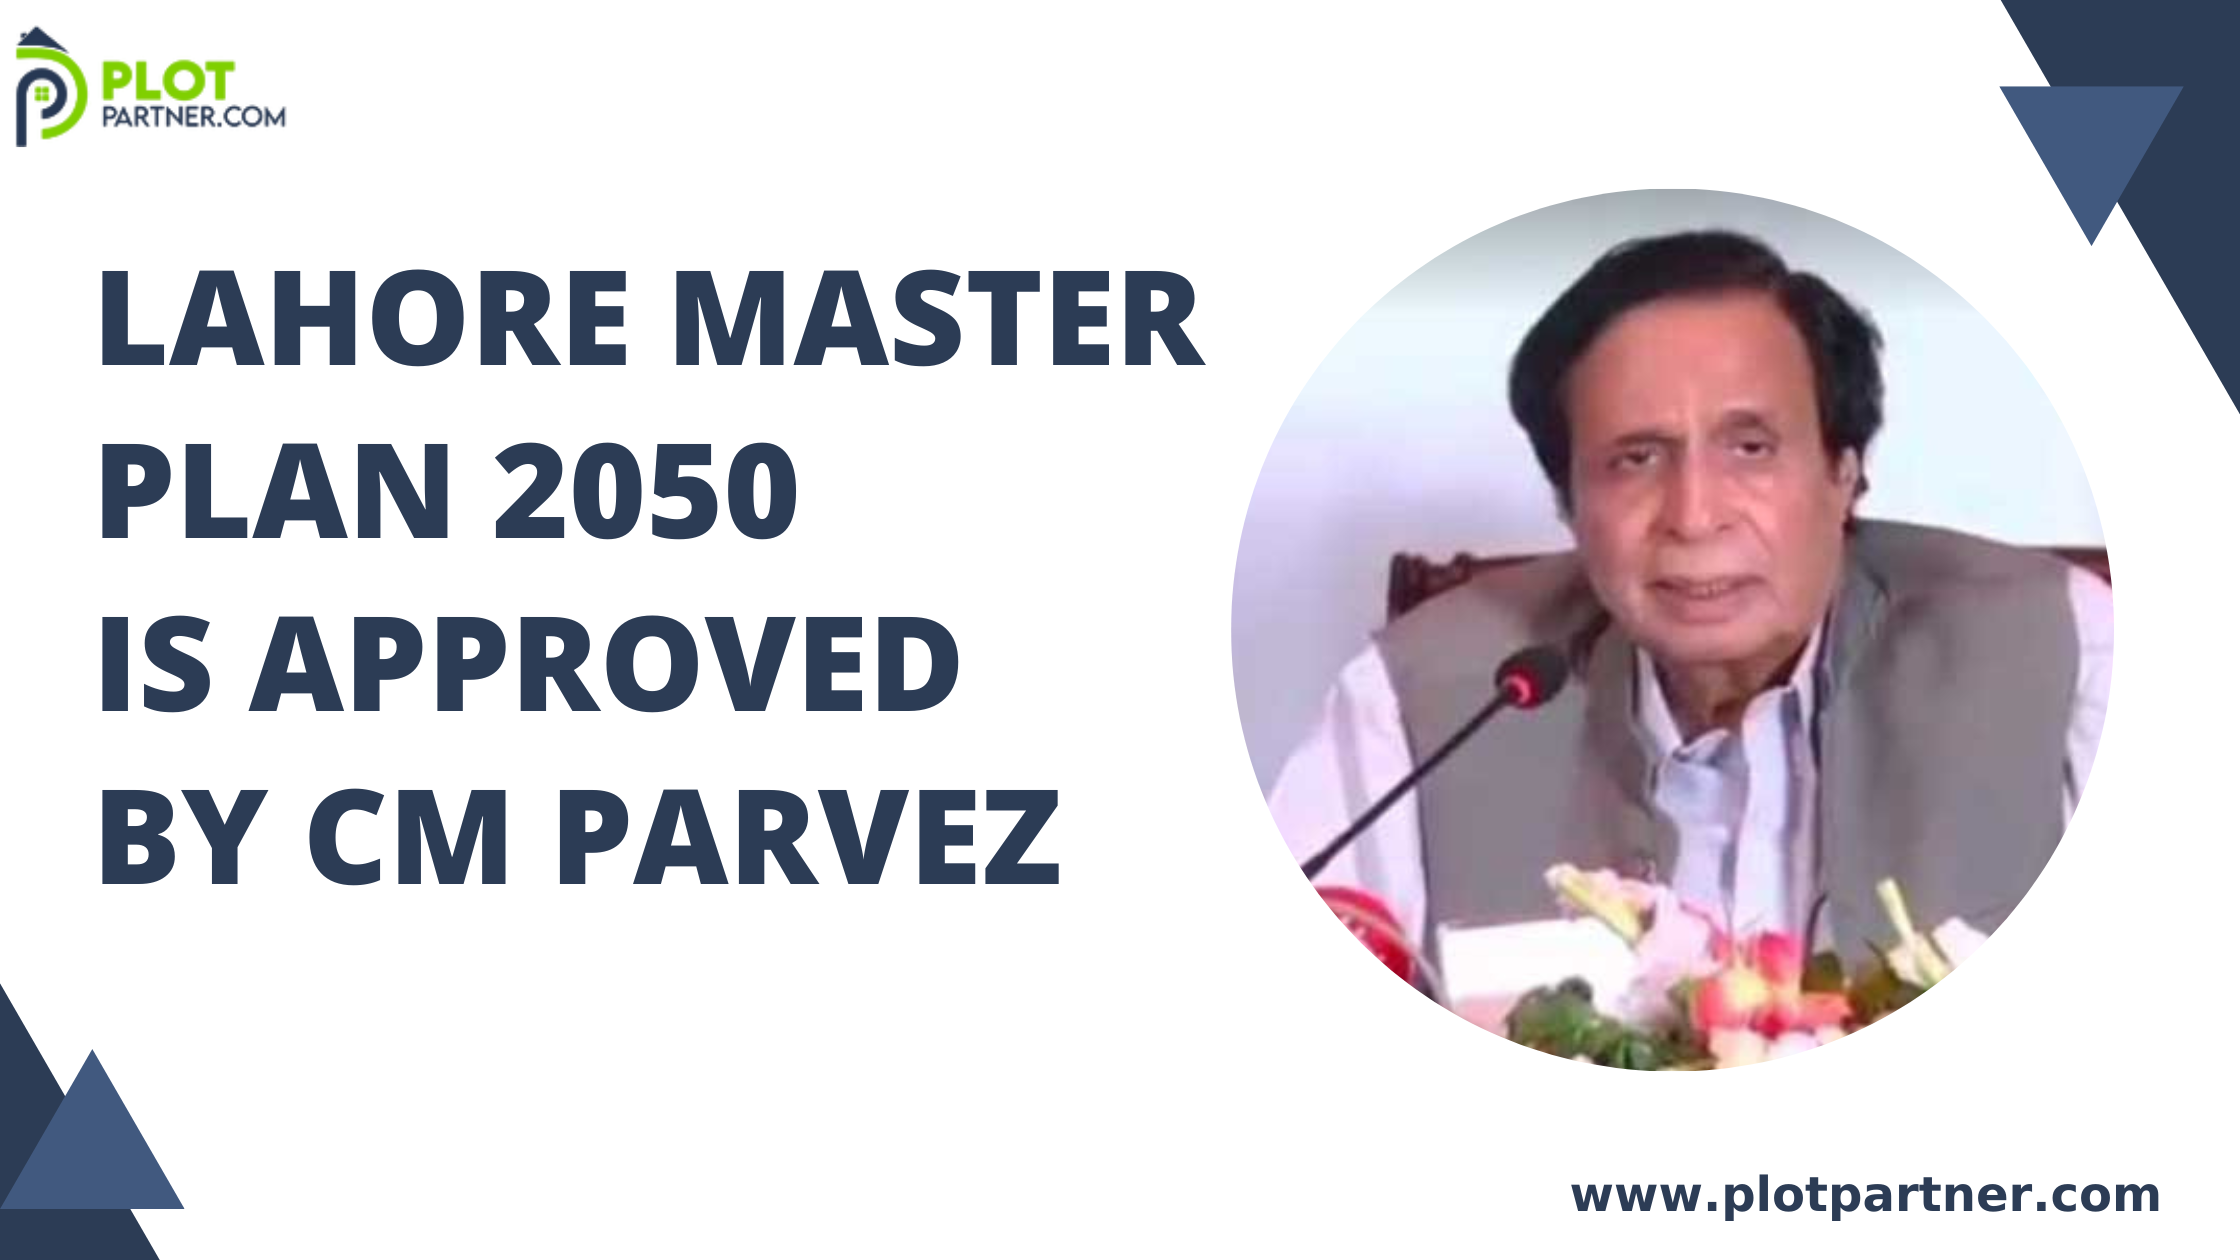 Lahore Master Plan 2050 is Approved by CM Parvez